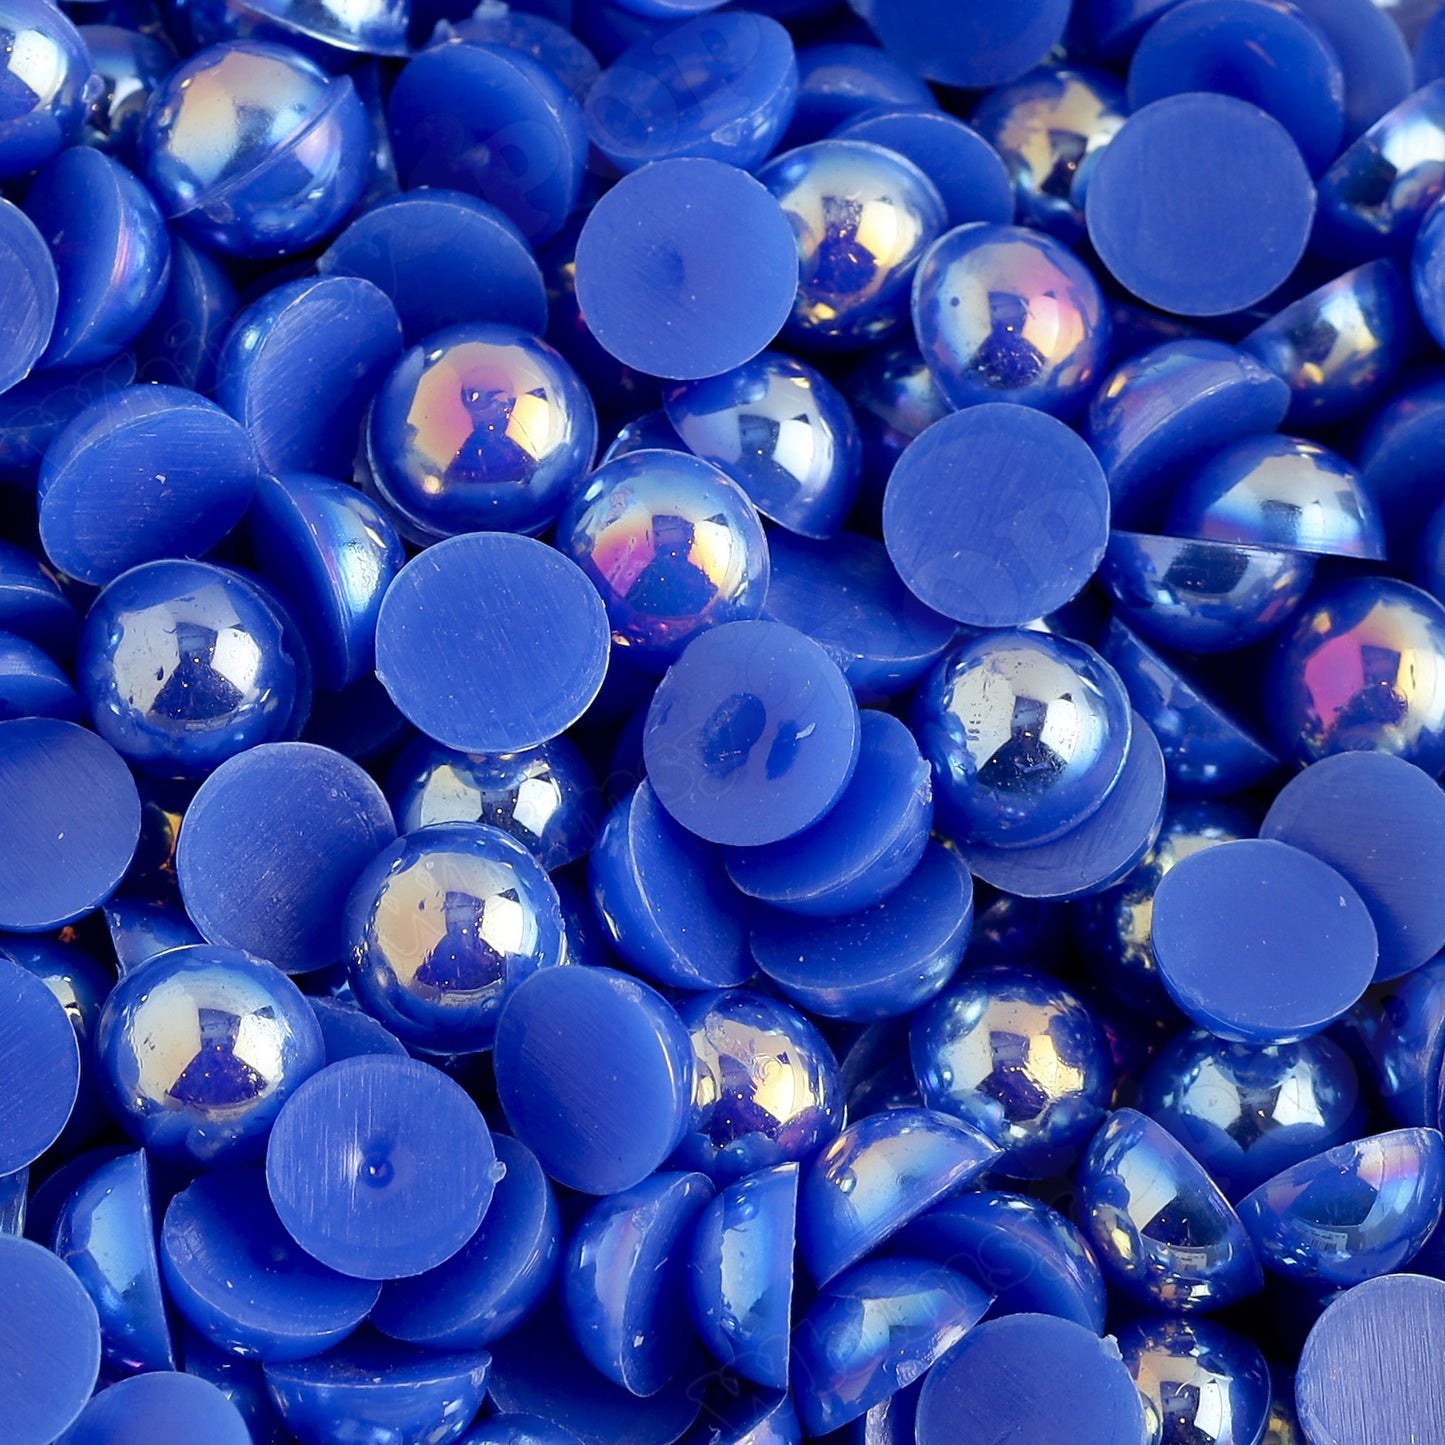 8mm AB Flatback Pearl Cabochons in a Variety of Colors